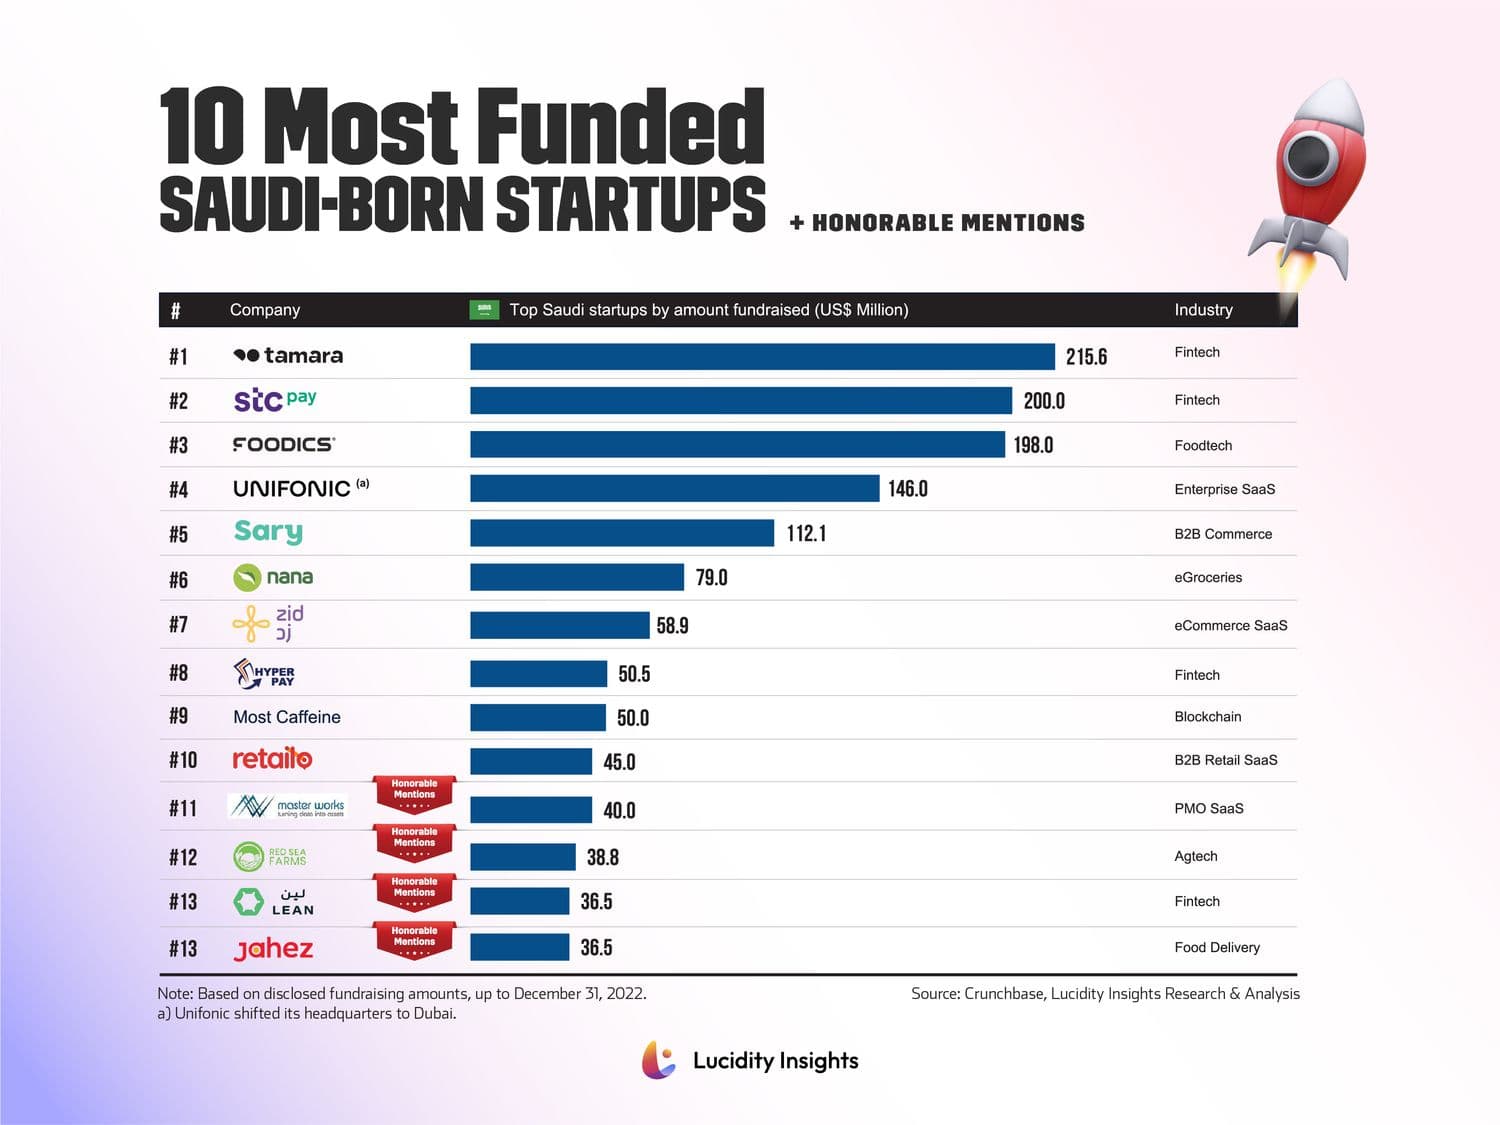 Most Funded Startups in Saudi Arabia